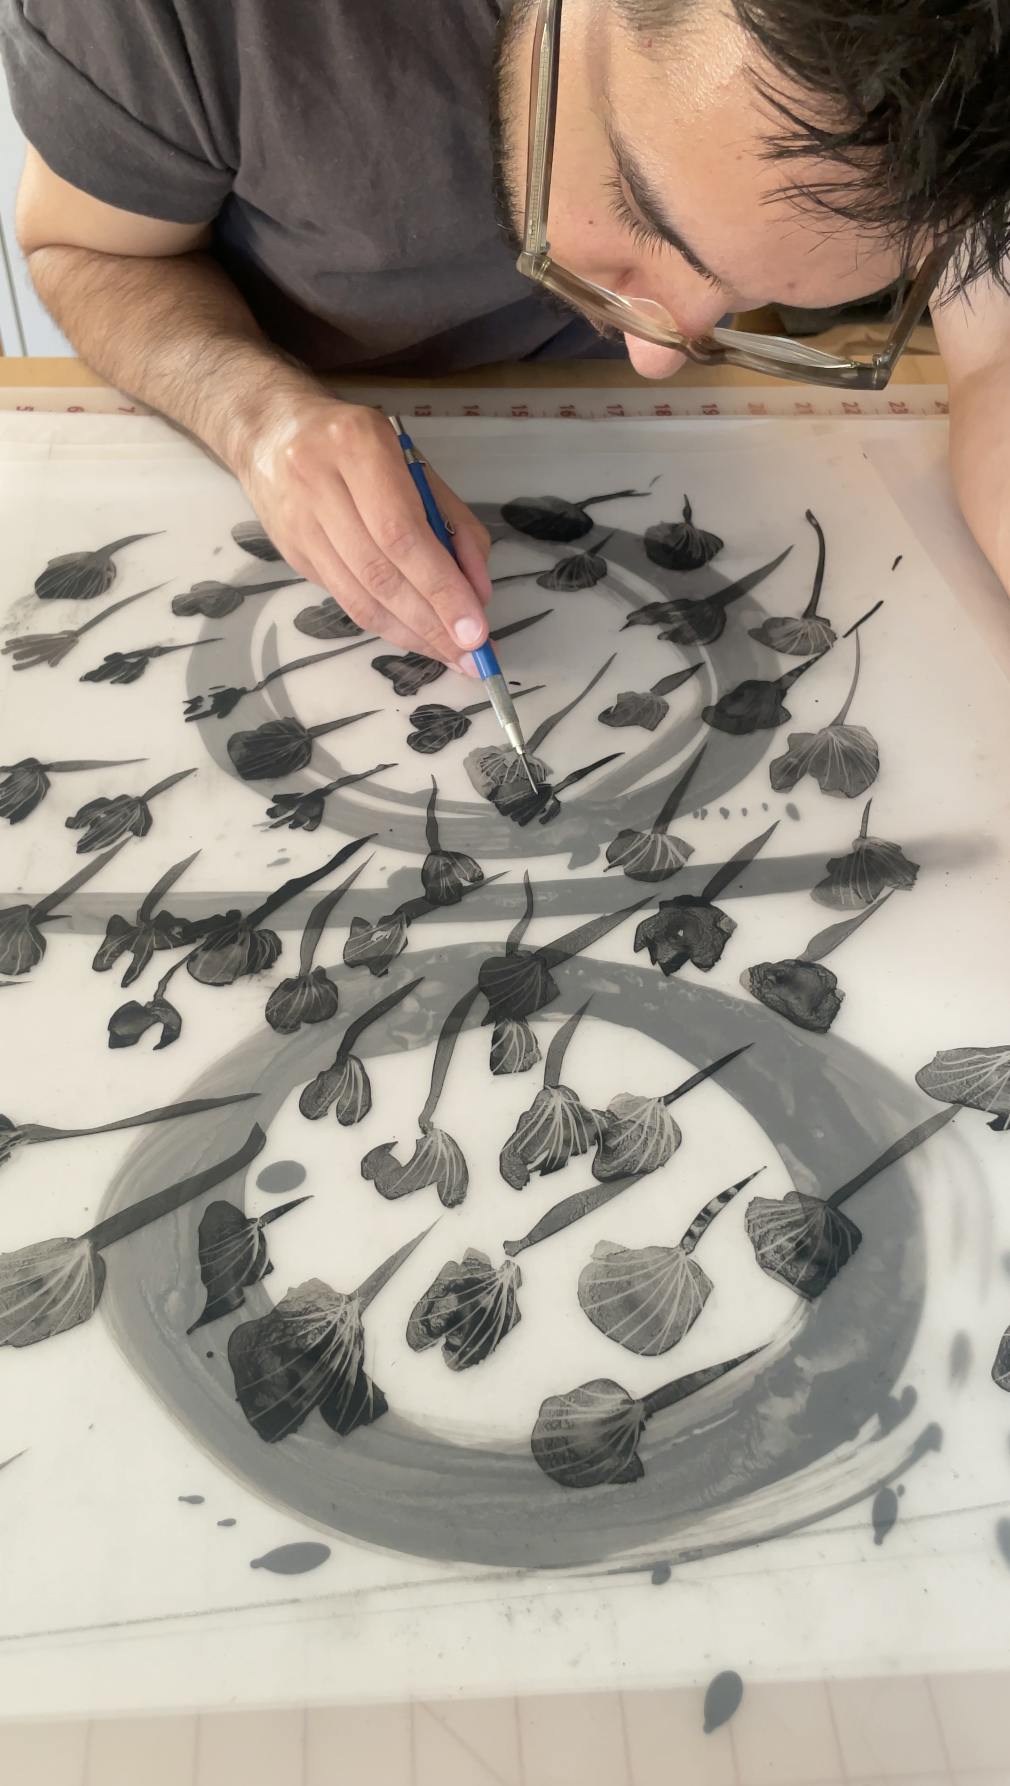 Artist Ruben Castillo using a thin paintbrush to paint black, repeating floral motifs on translucent paper.